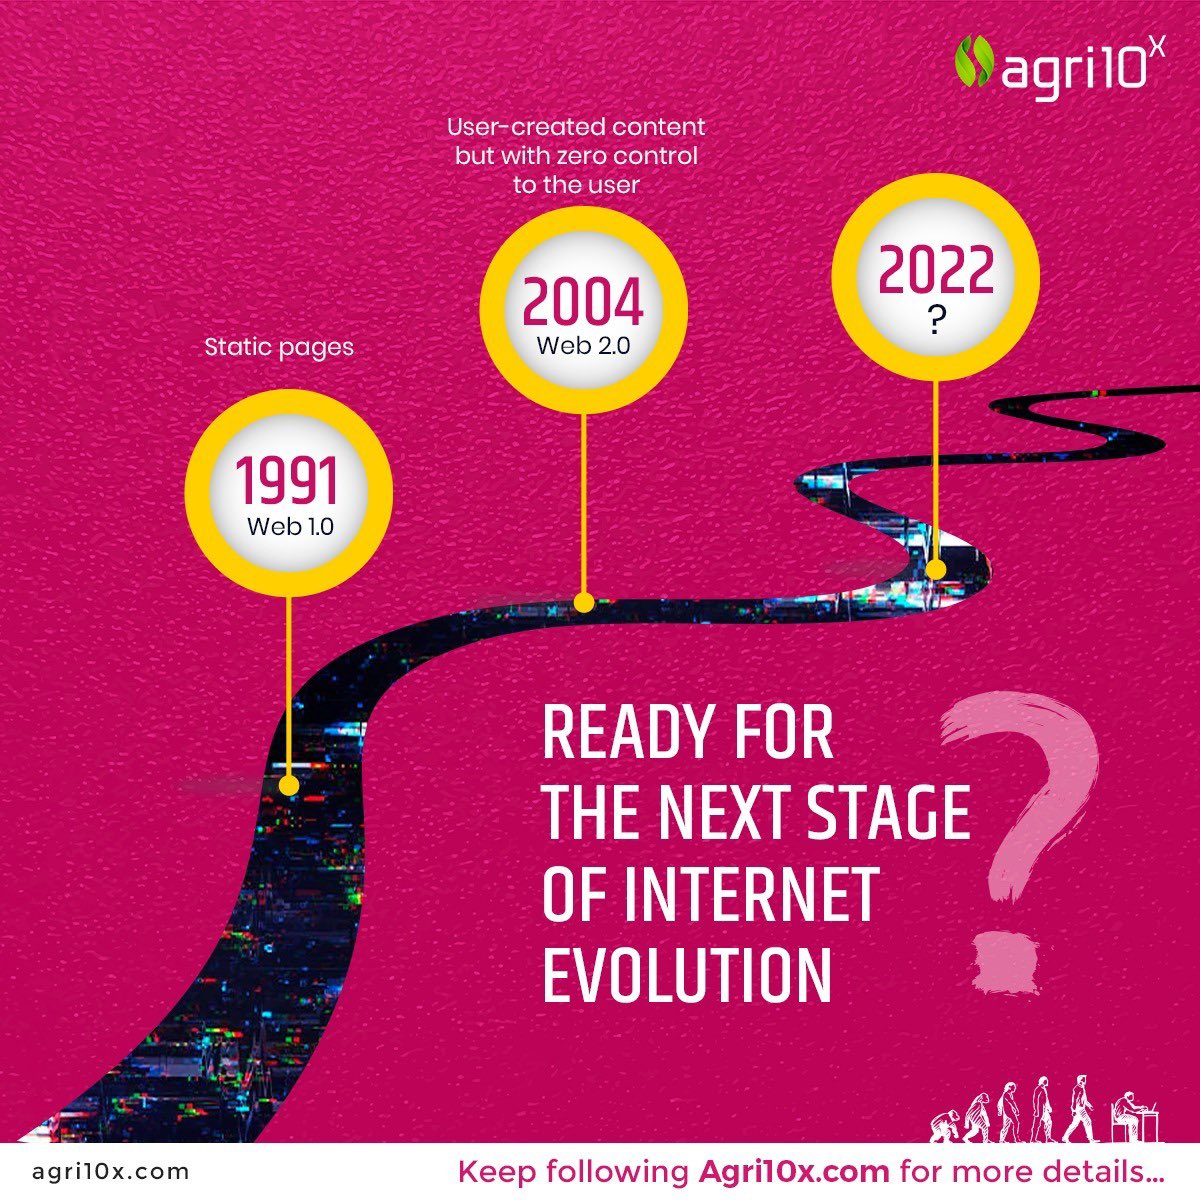 The web has grown at its own pace since 1991. Each stage has evolution has proved to be revolutionary. What revolution will it bring this time? To know more, keep following Agri10x. #Agri10x #Agritech #Evolution #Web #Future